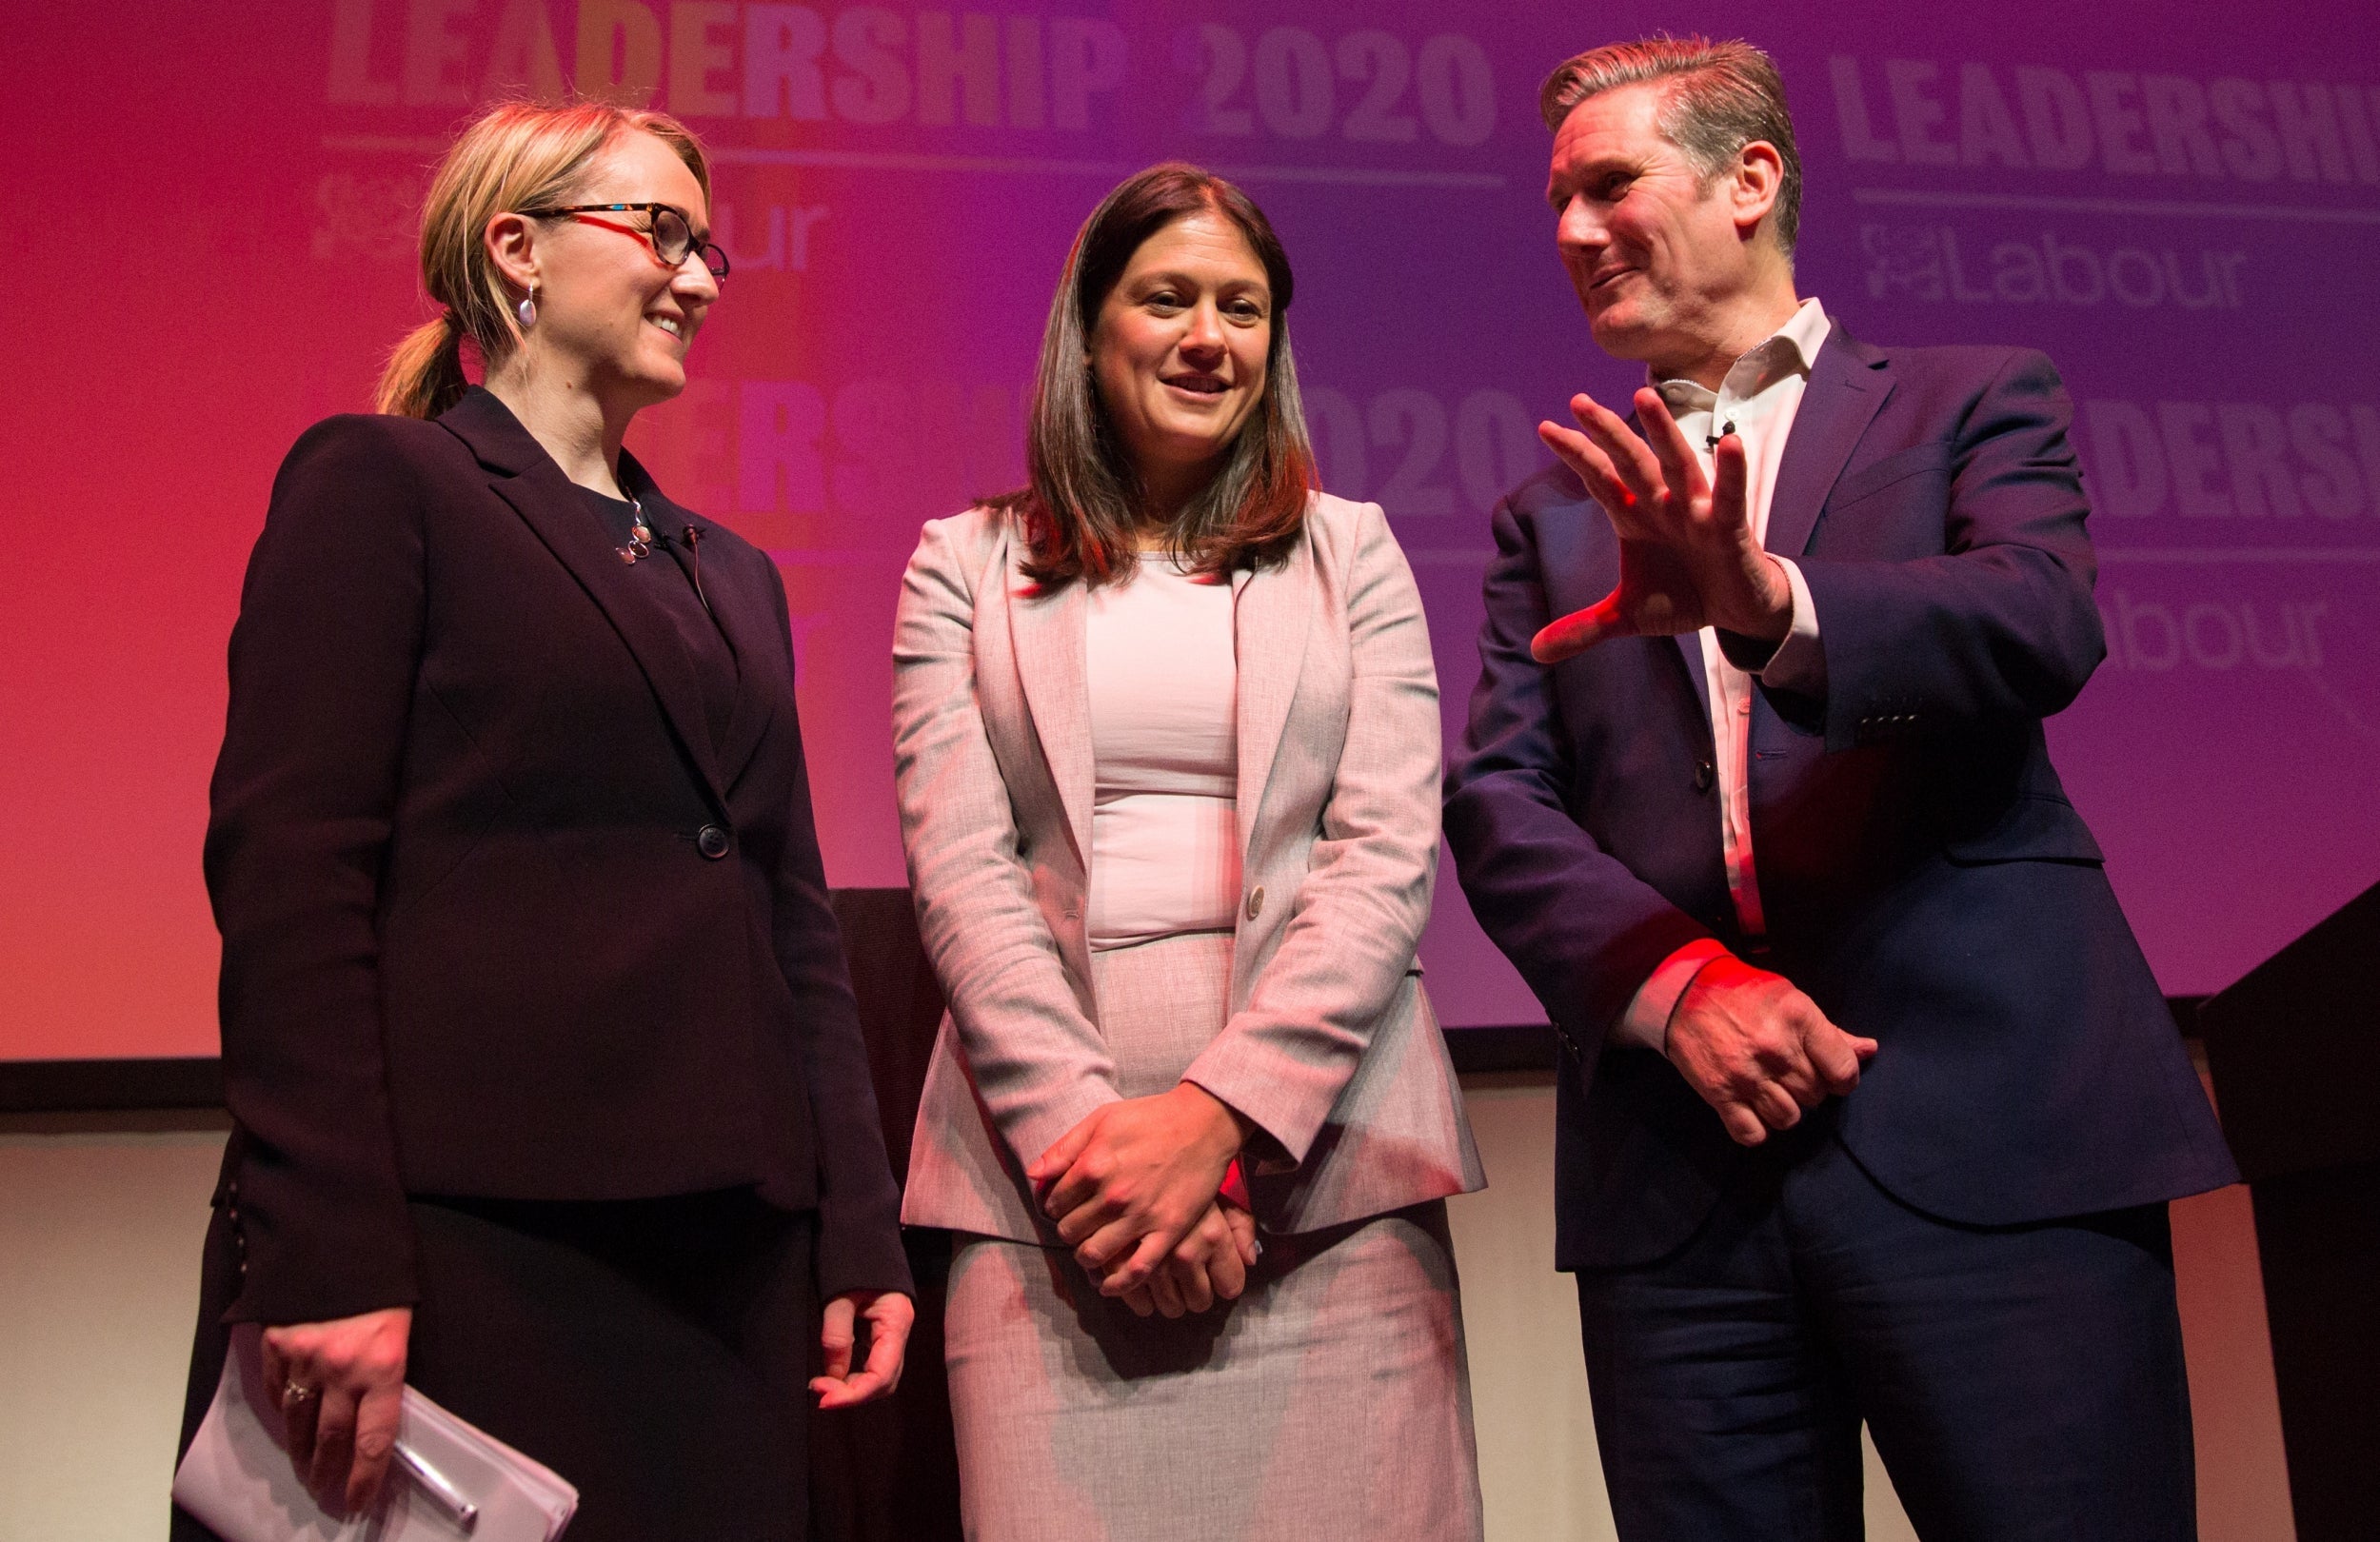 Labour leadership candidates Rebecca Long-Bailey, Lisa Nandy and Keir Starmer